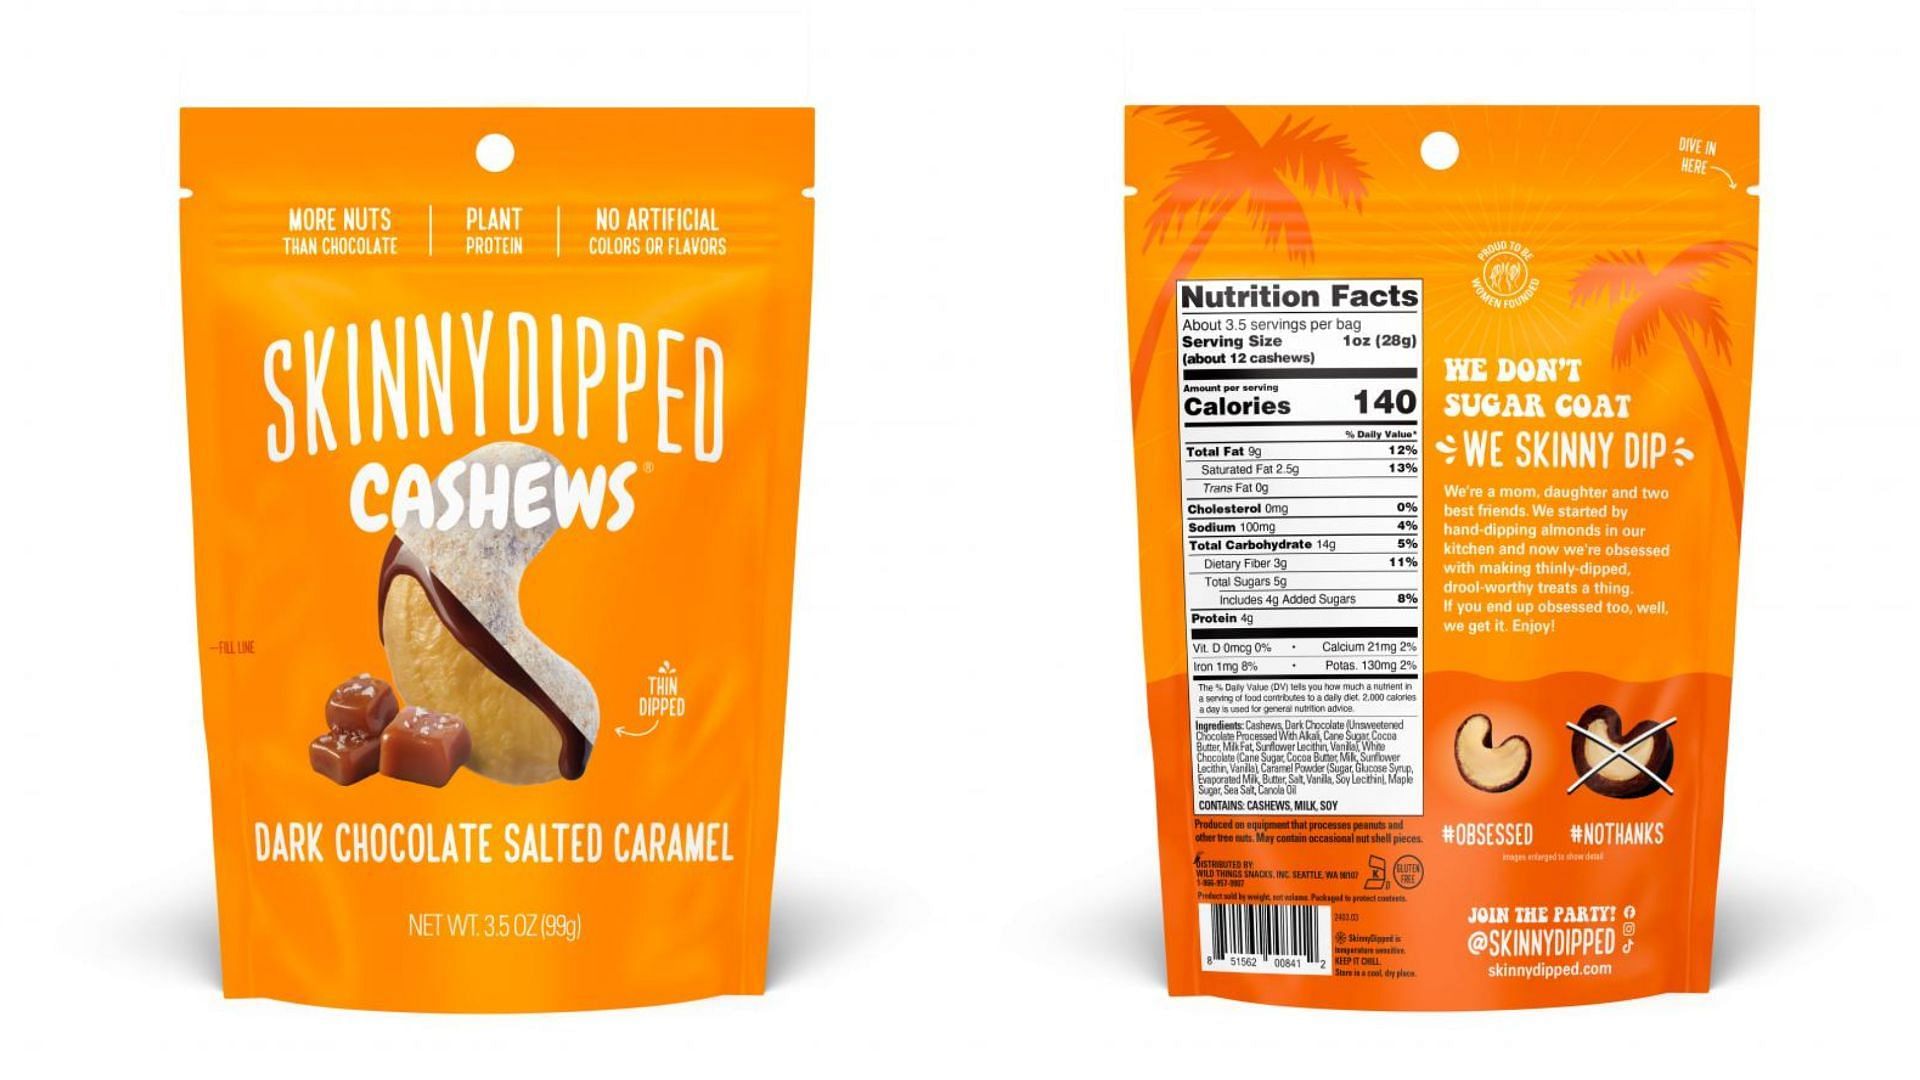 packets of the SkinnyDipped Dark Chocolate Salted Caramel Cashew recalled over concerns of undeclared peanut allergens (Image via FDA)